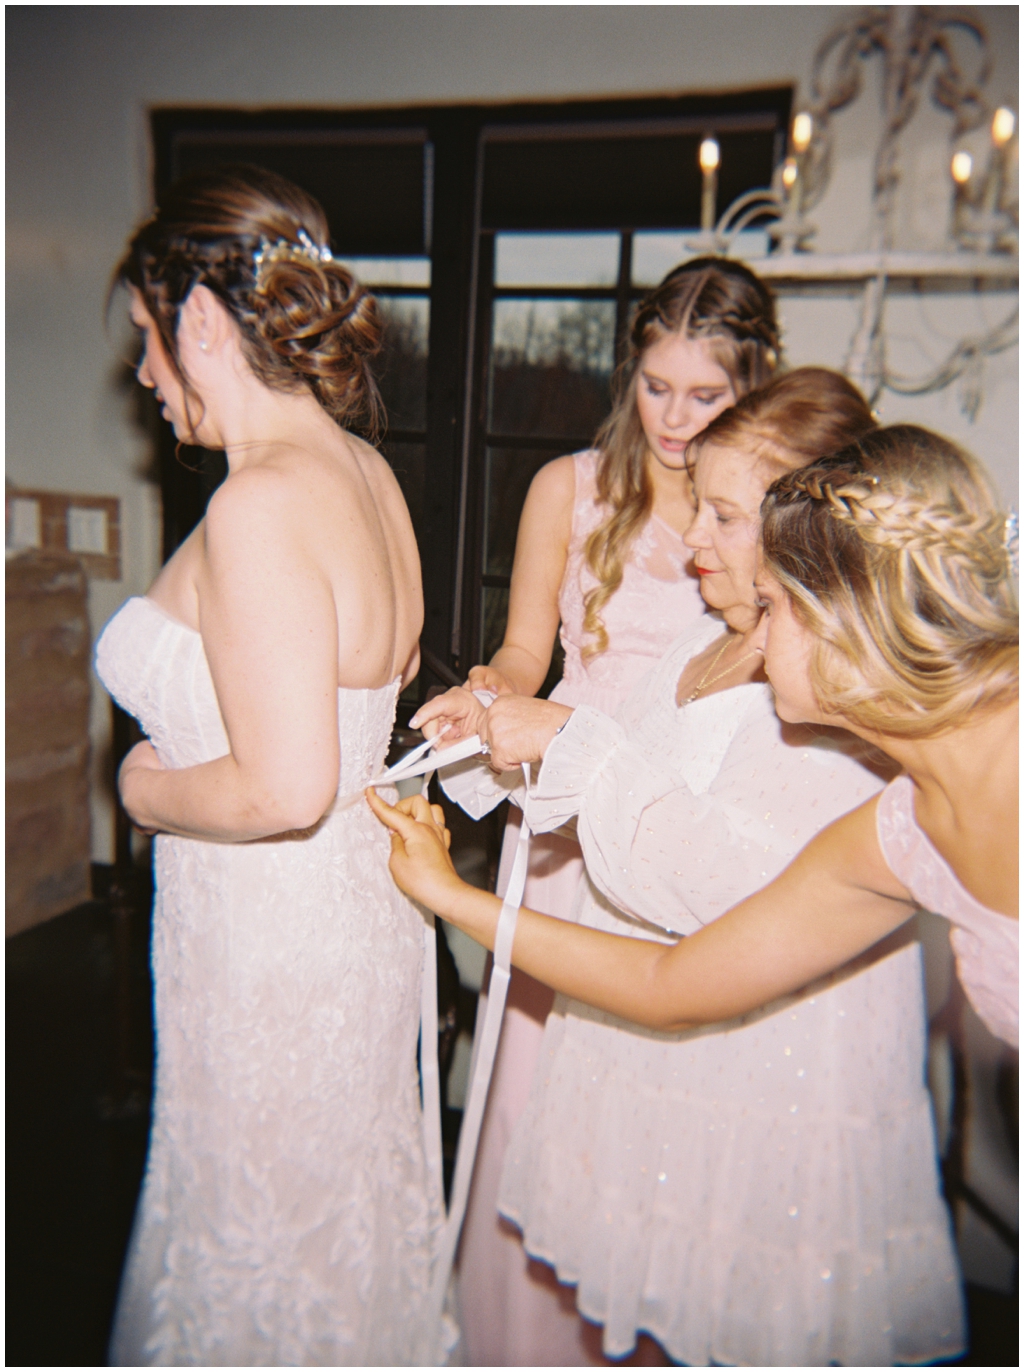 Bridal party & bride getting ready in the bridal suite at Chateau Selah. Image by Holly Michon Photography.